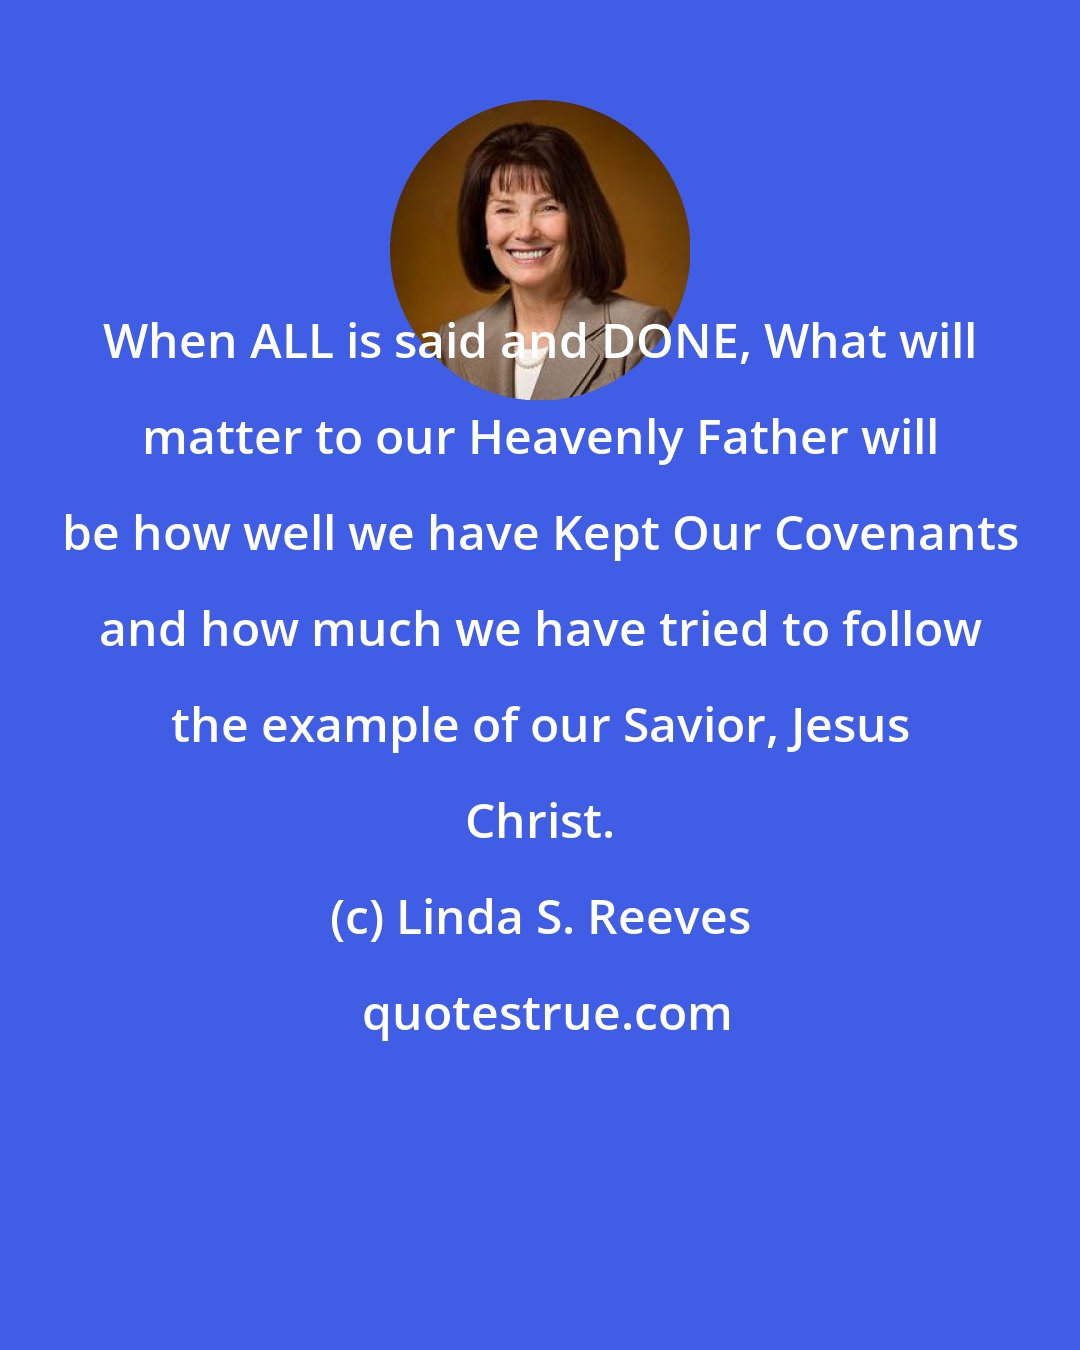 Linda S. Reeves: When ALL is said and DONE, What will matter to our Heavenly Father will be how well we have Kept Our Covenants and how much we have tried to follow the example of our Savior, Jesus Christ.